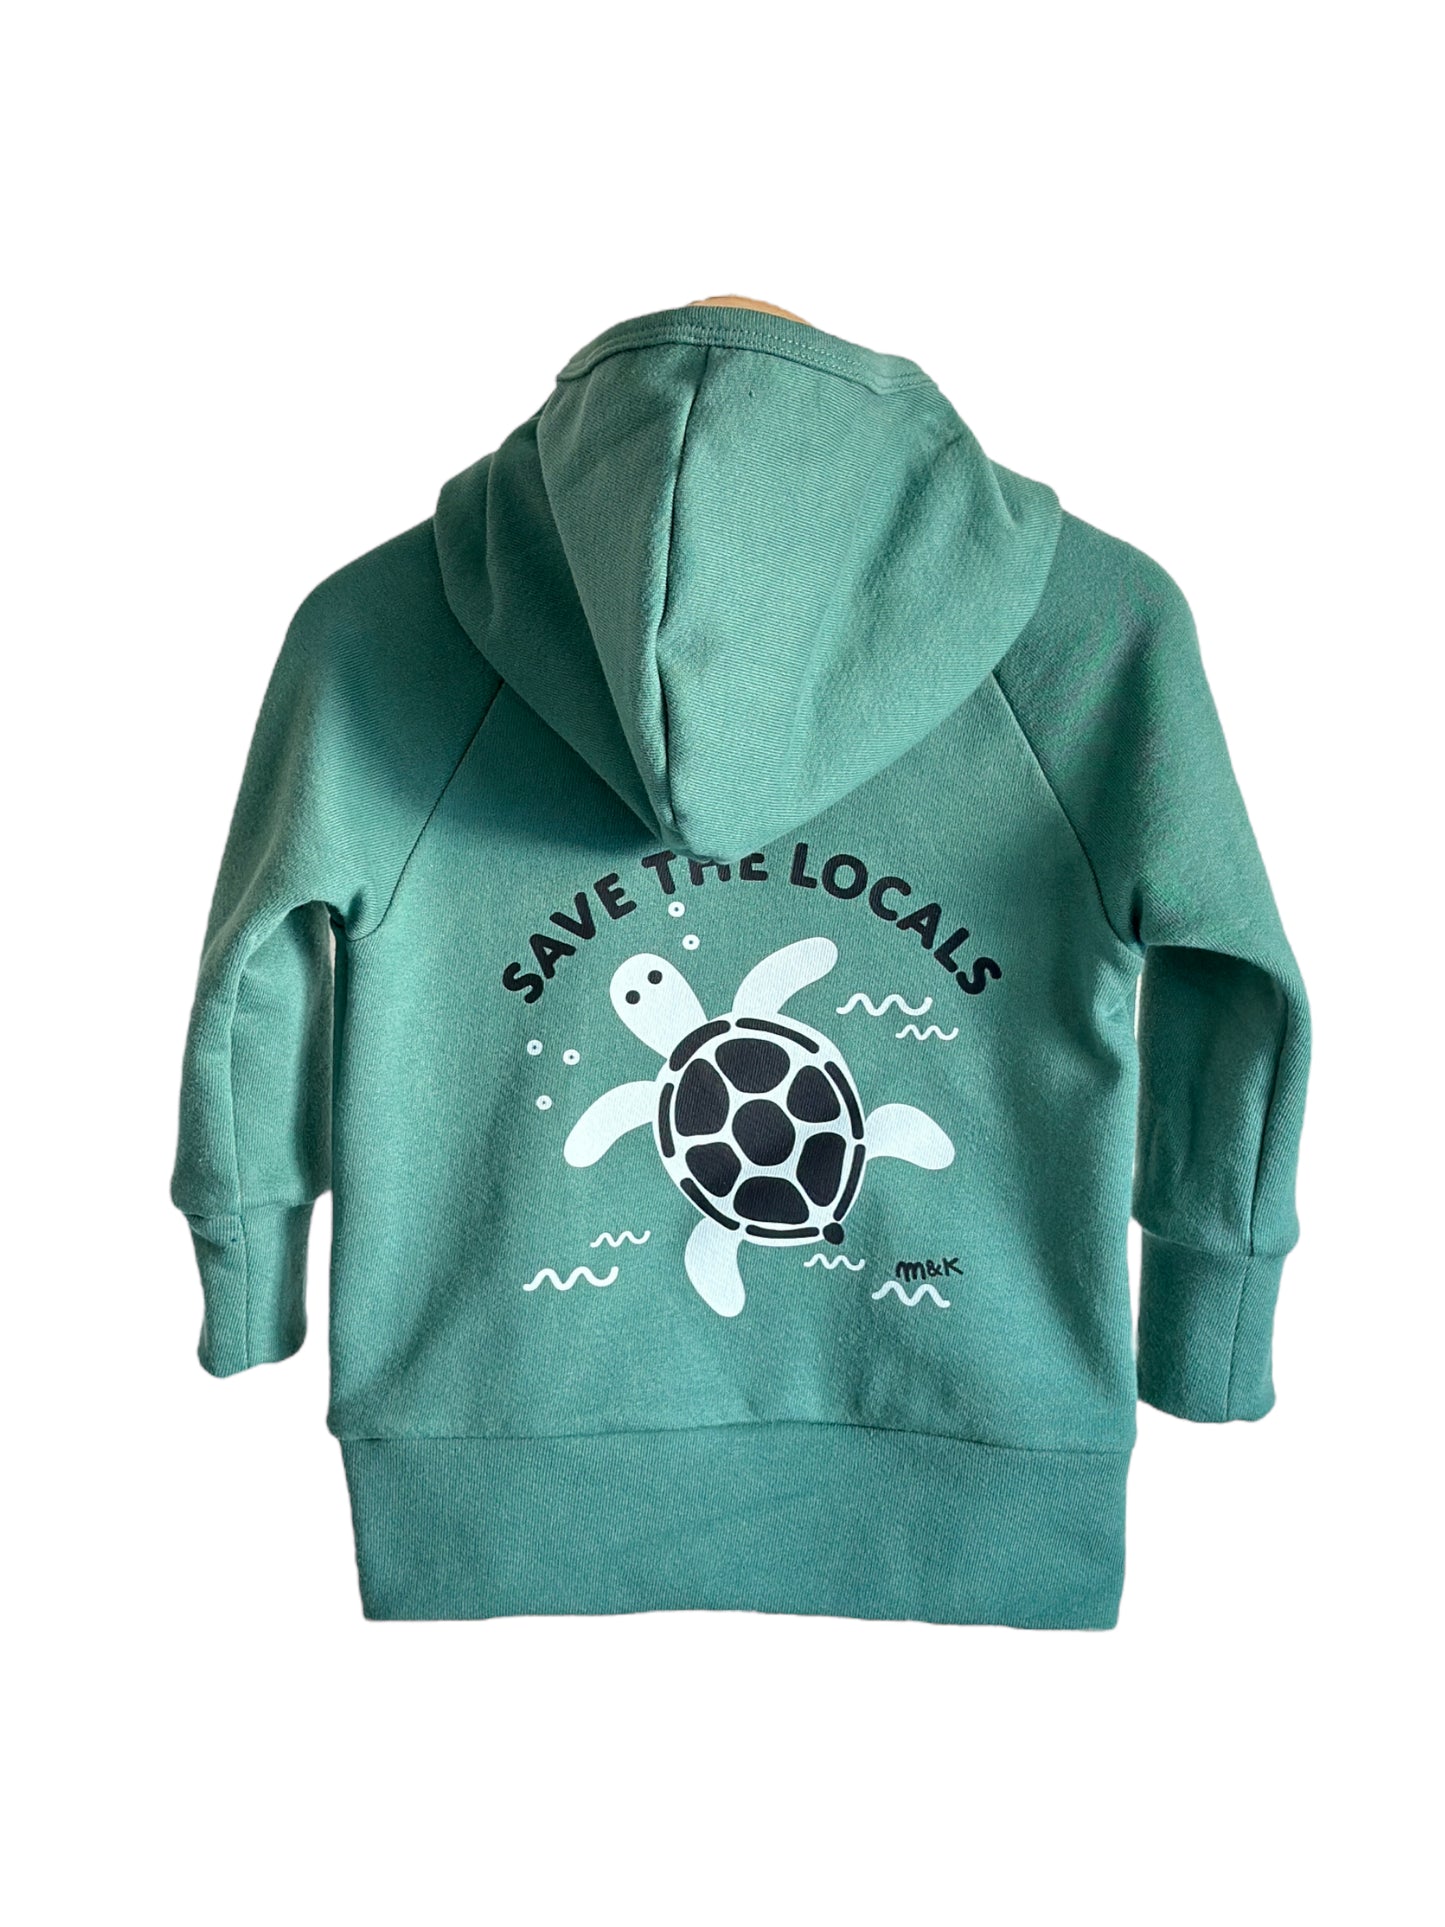 SAVE THE LOCALS HOODIE